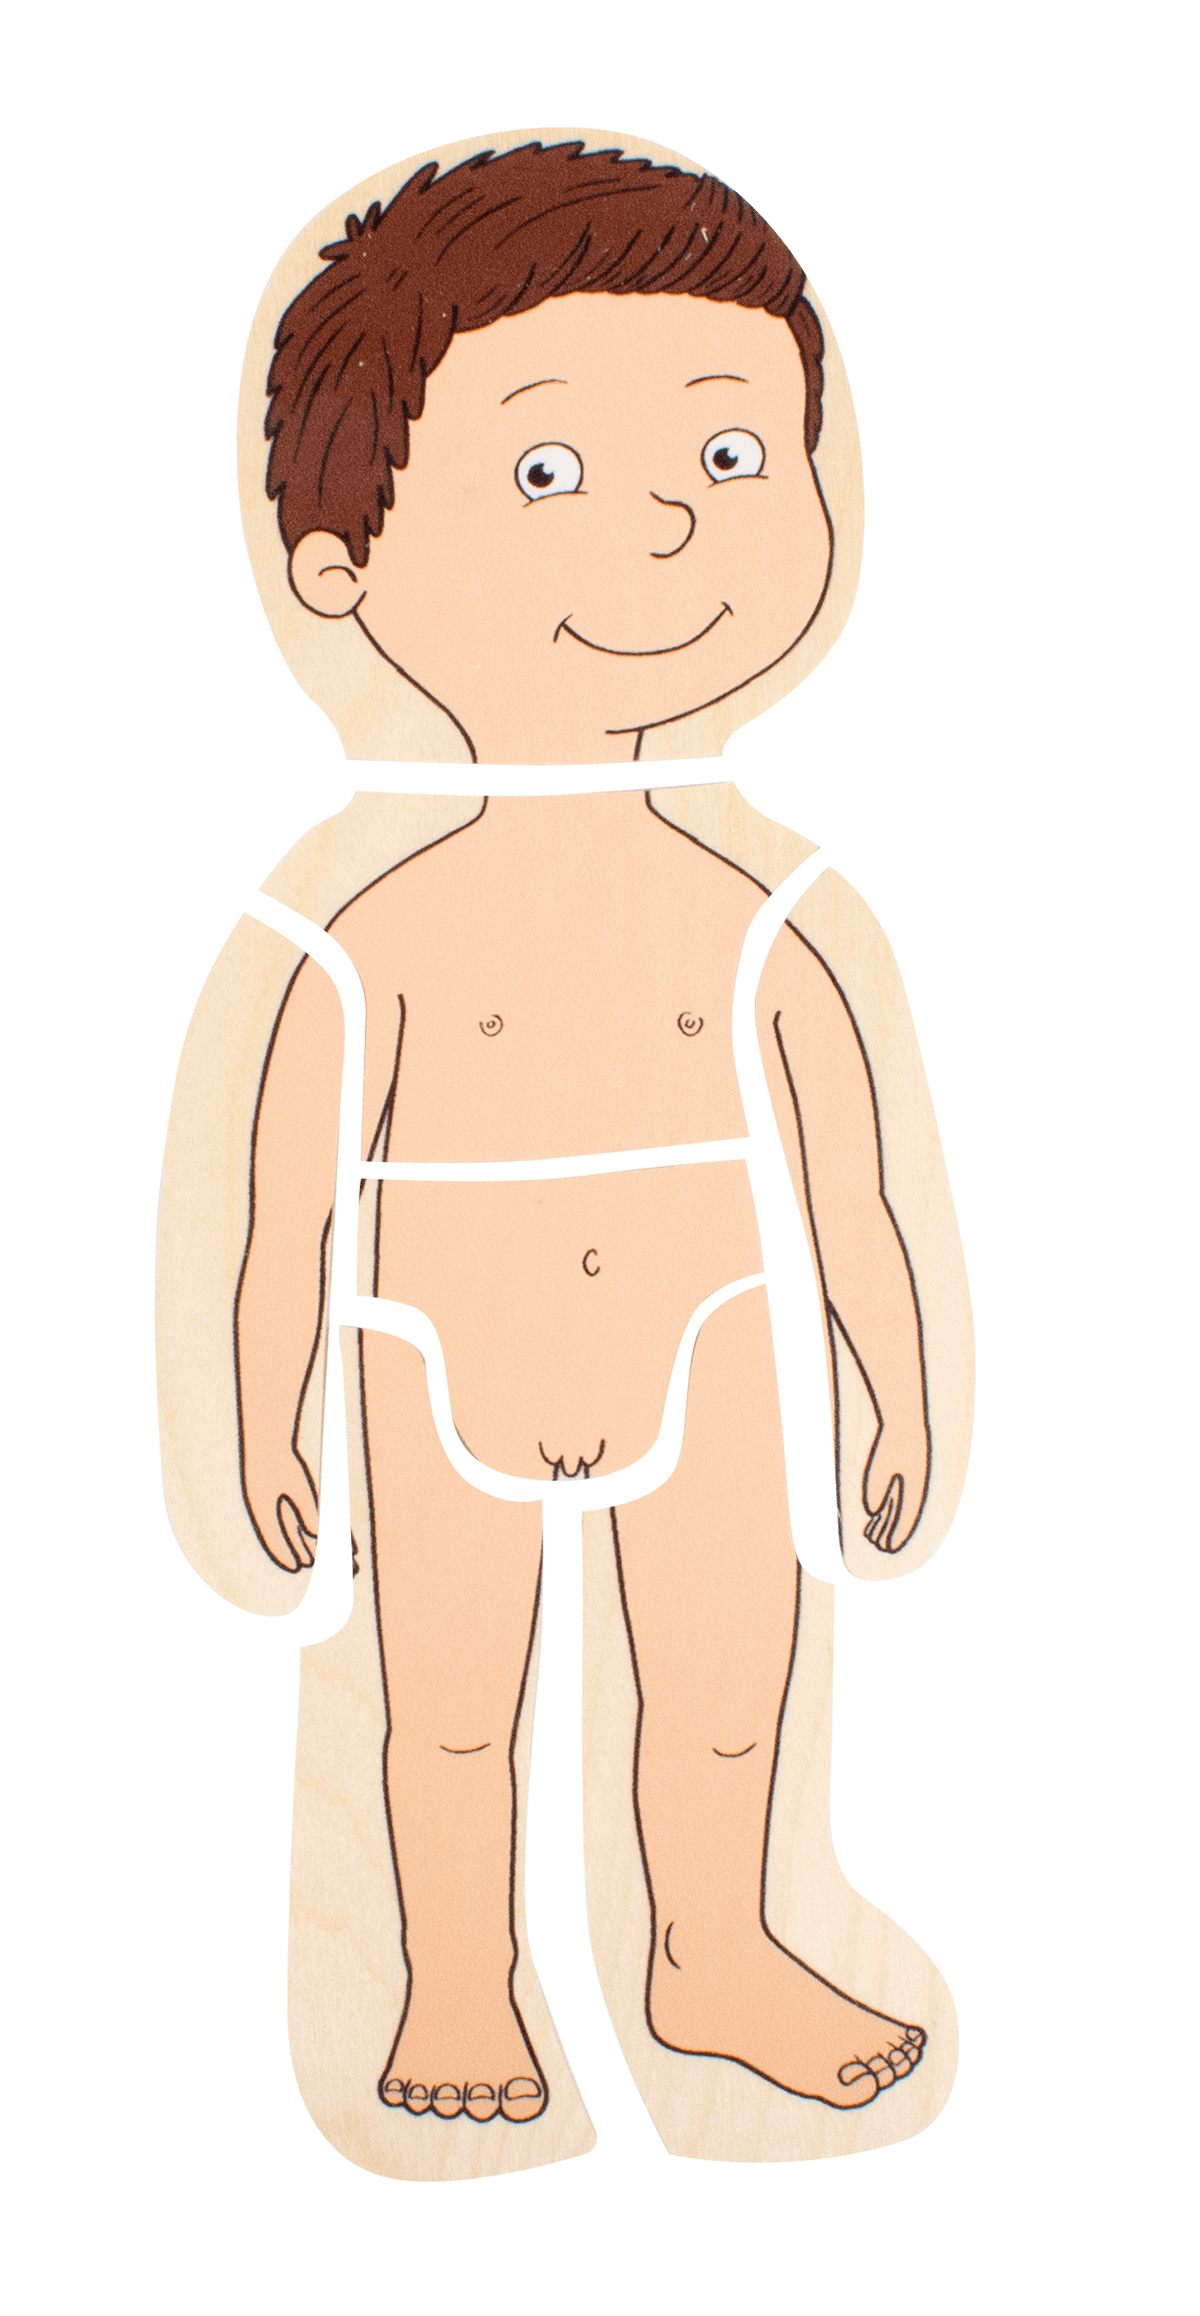 Parts of human body | Human body, Body, Charts for kids